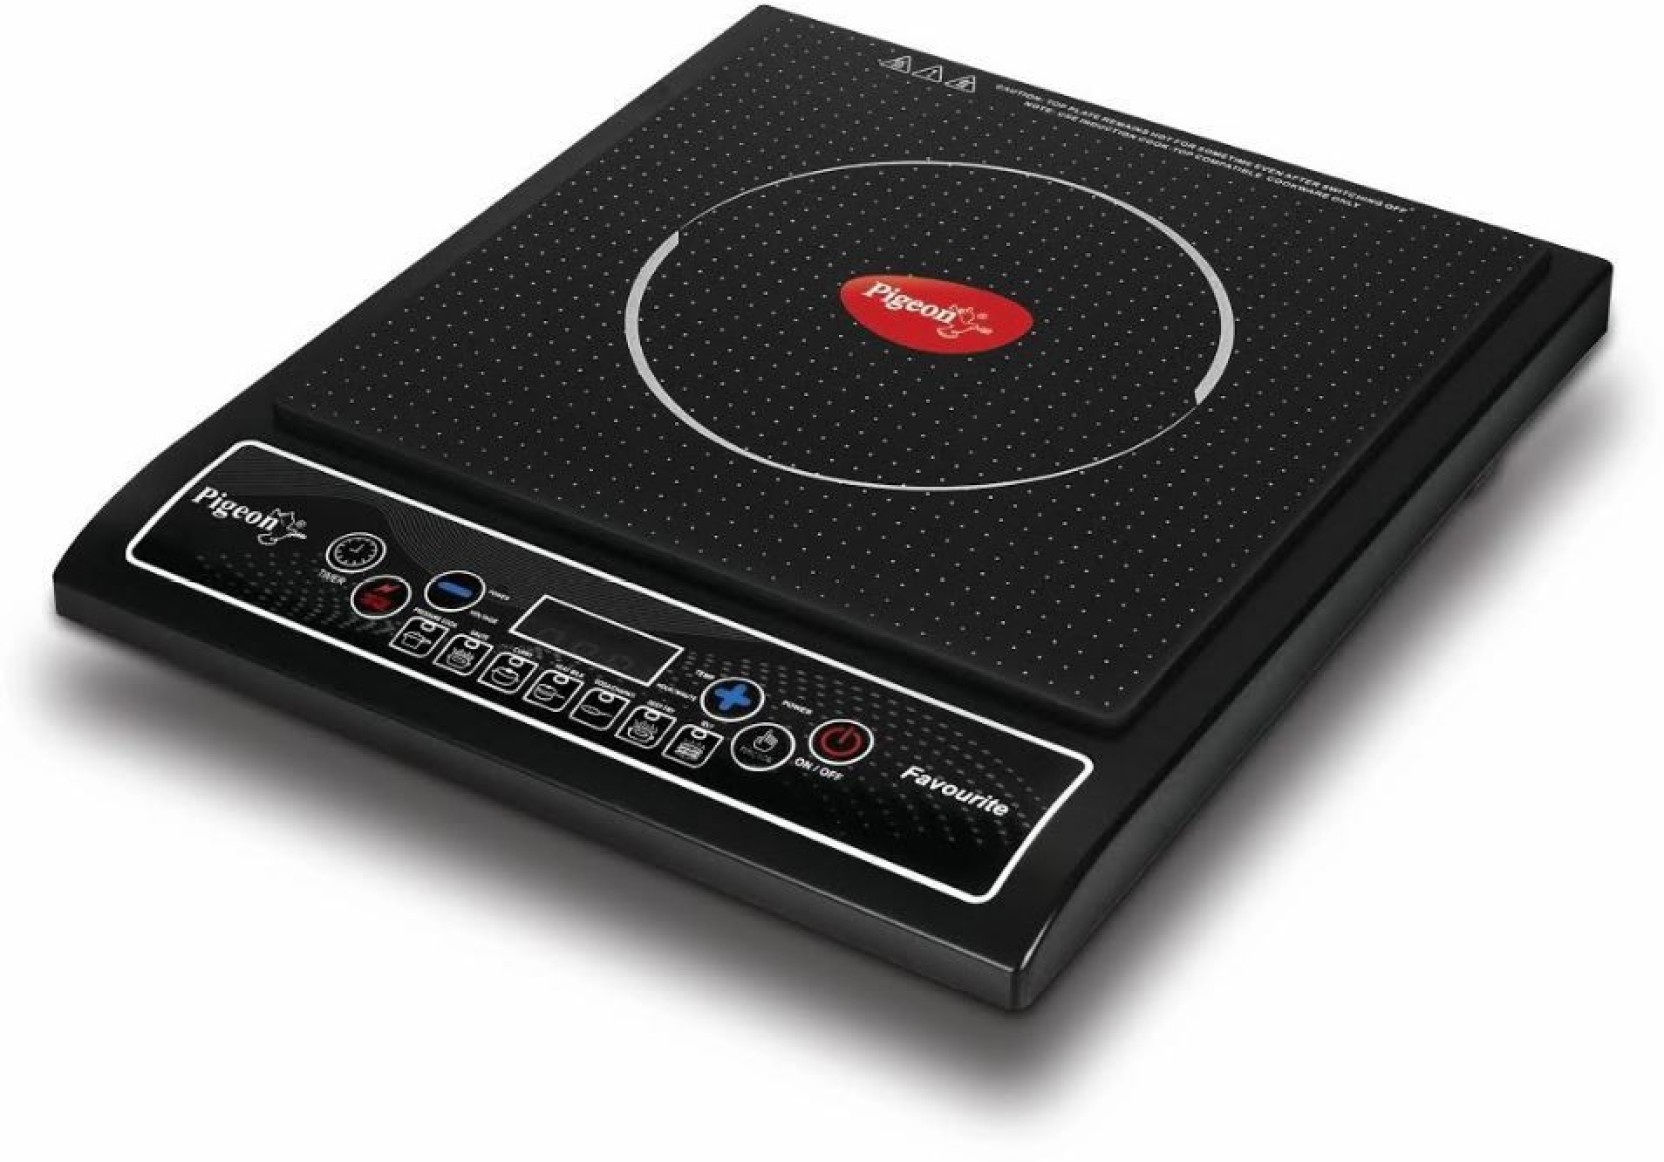 Pigeon Induction Cooktop